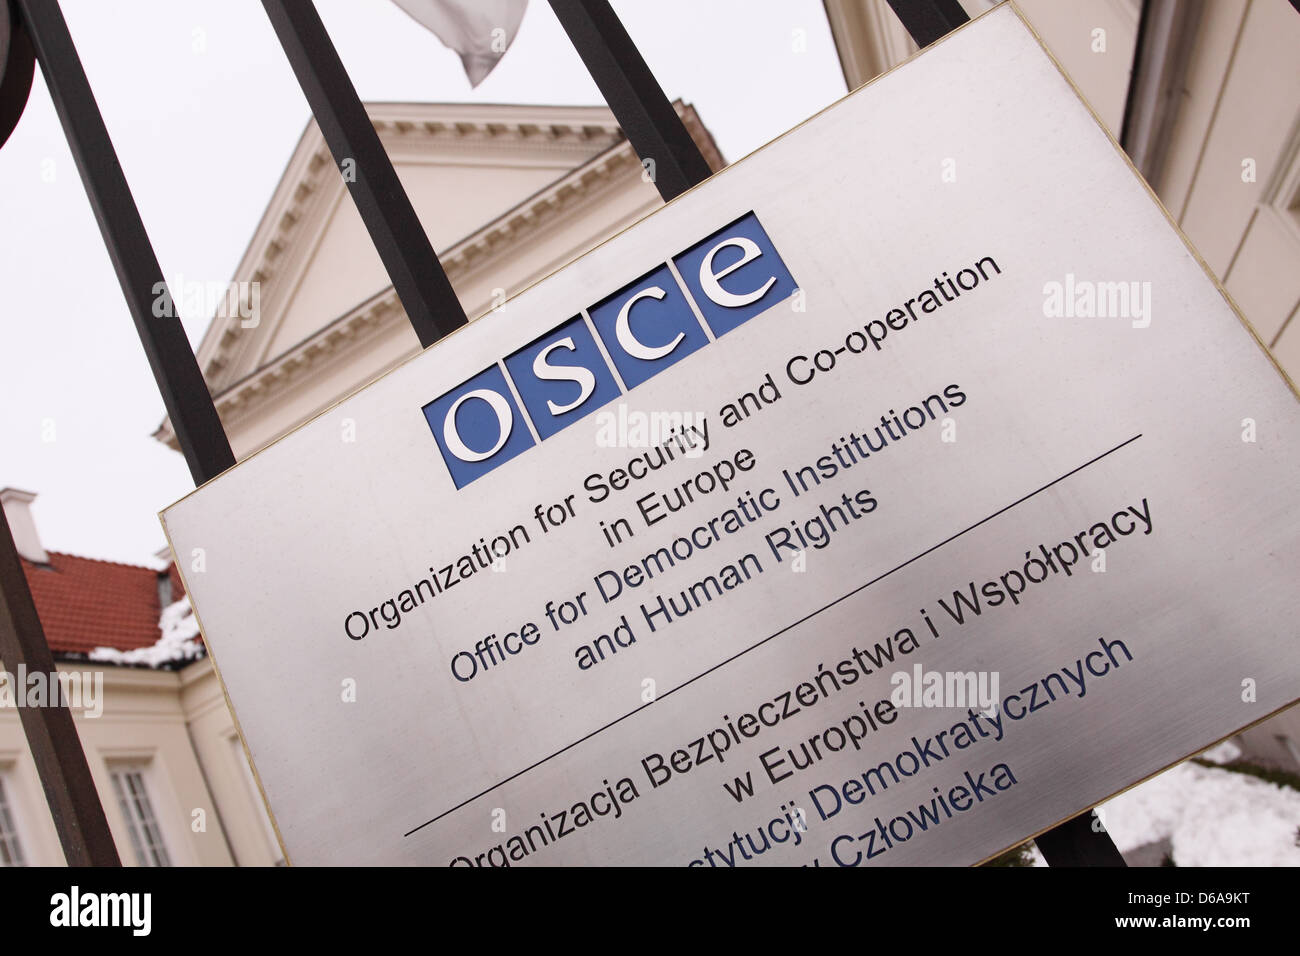 OSCE Organisation for Security and Co-operation in Europe building sign Stock Photo